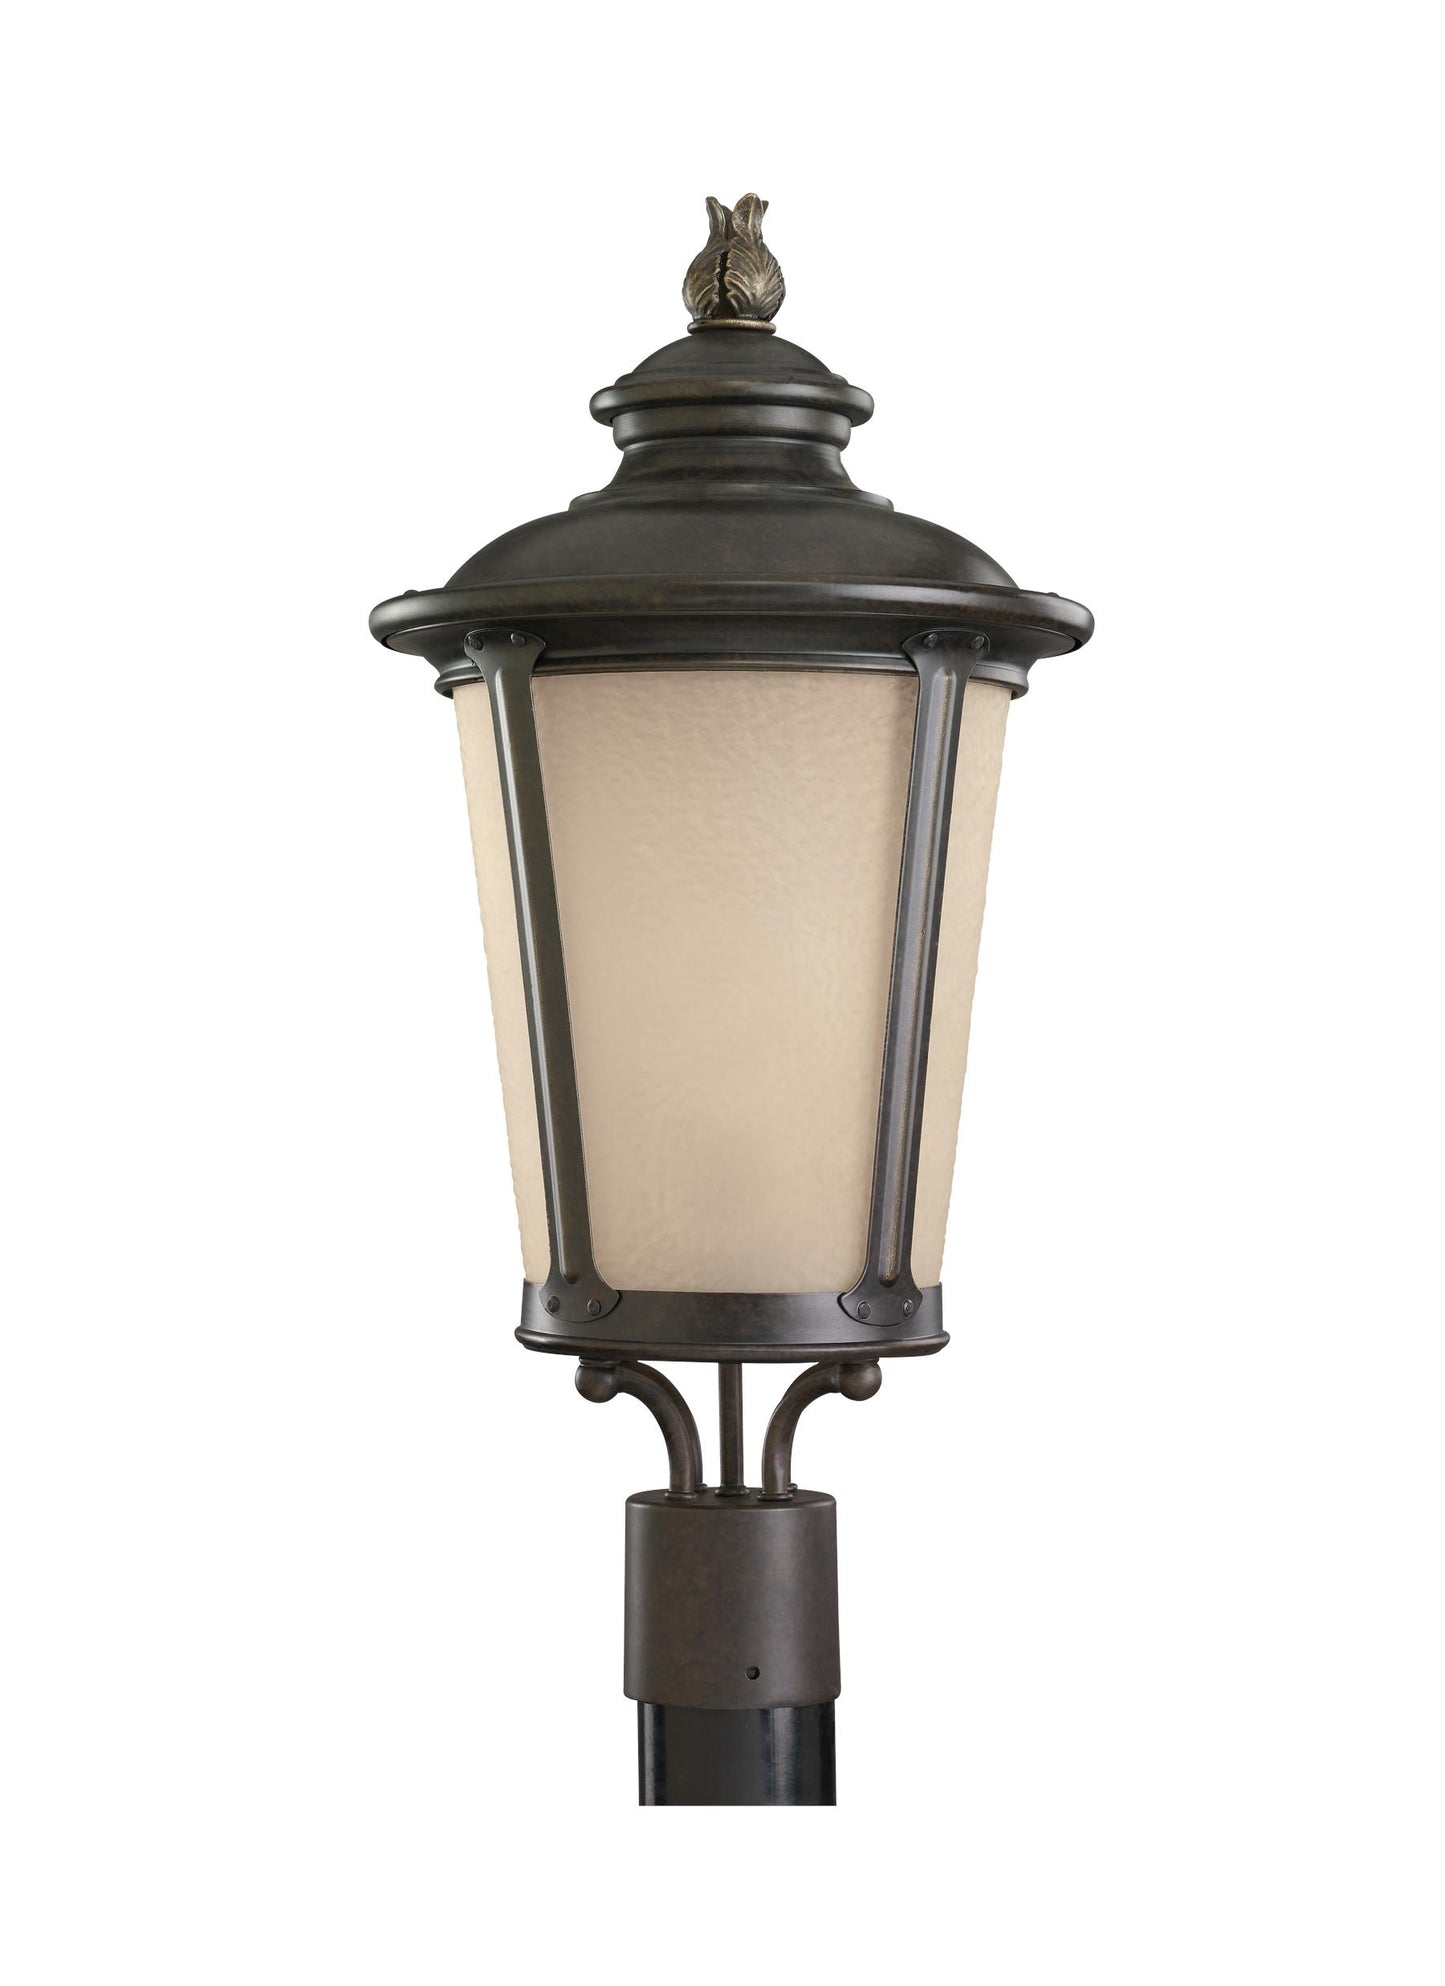 Cape May traditional 1-light outdoor exterior post lantern in burled iron grey finish with etched light amber glass diffuser